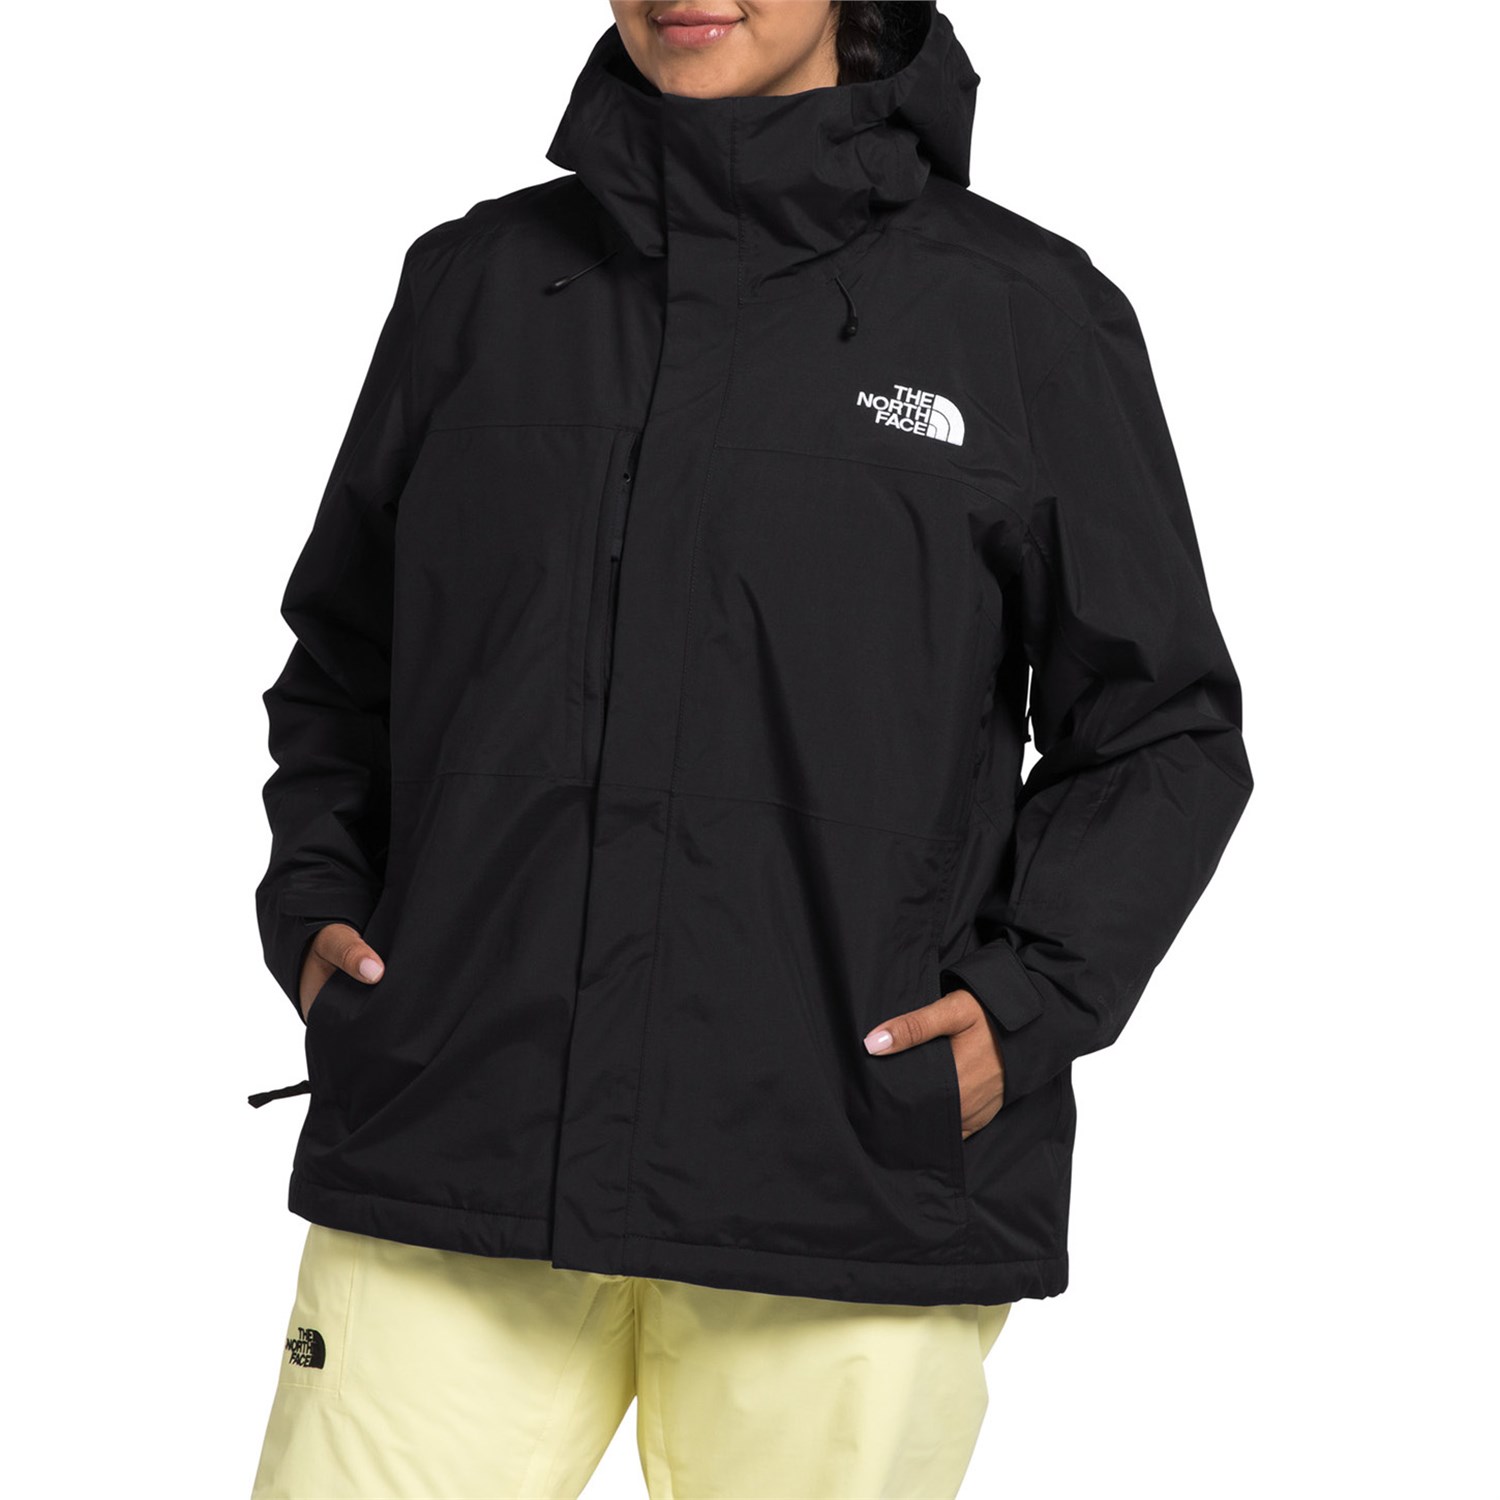 Куртка The North Face Freedom Insulated Plus, черный куртка the north face freedom insulated черный